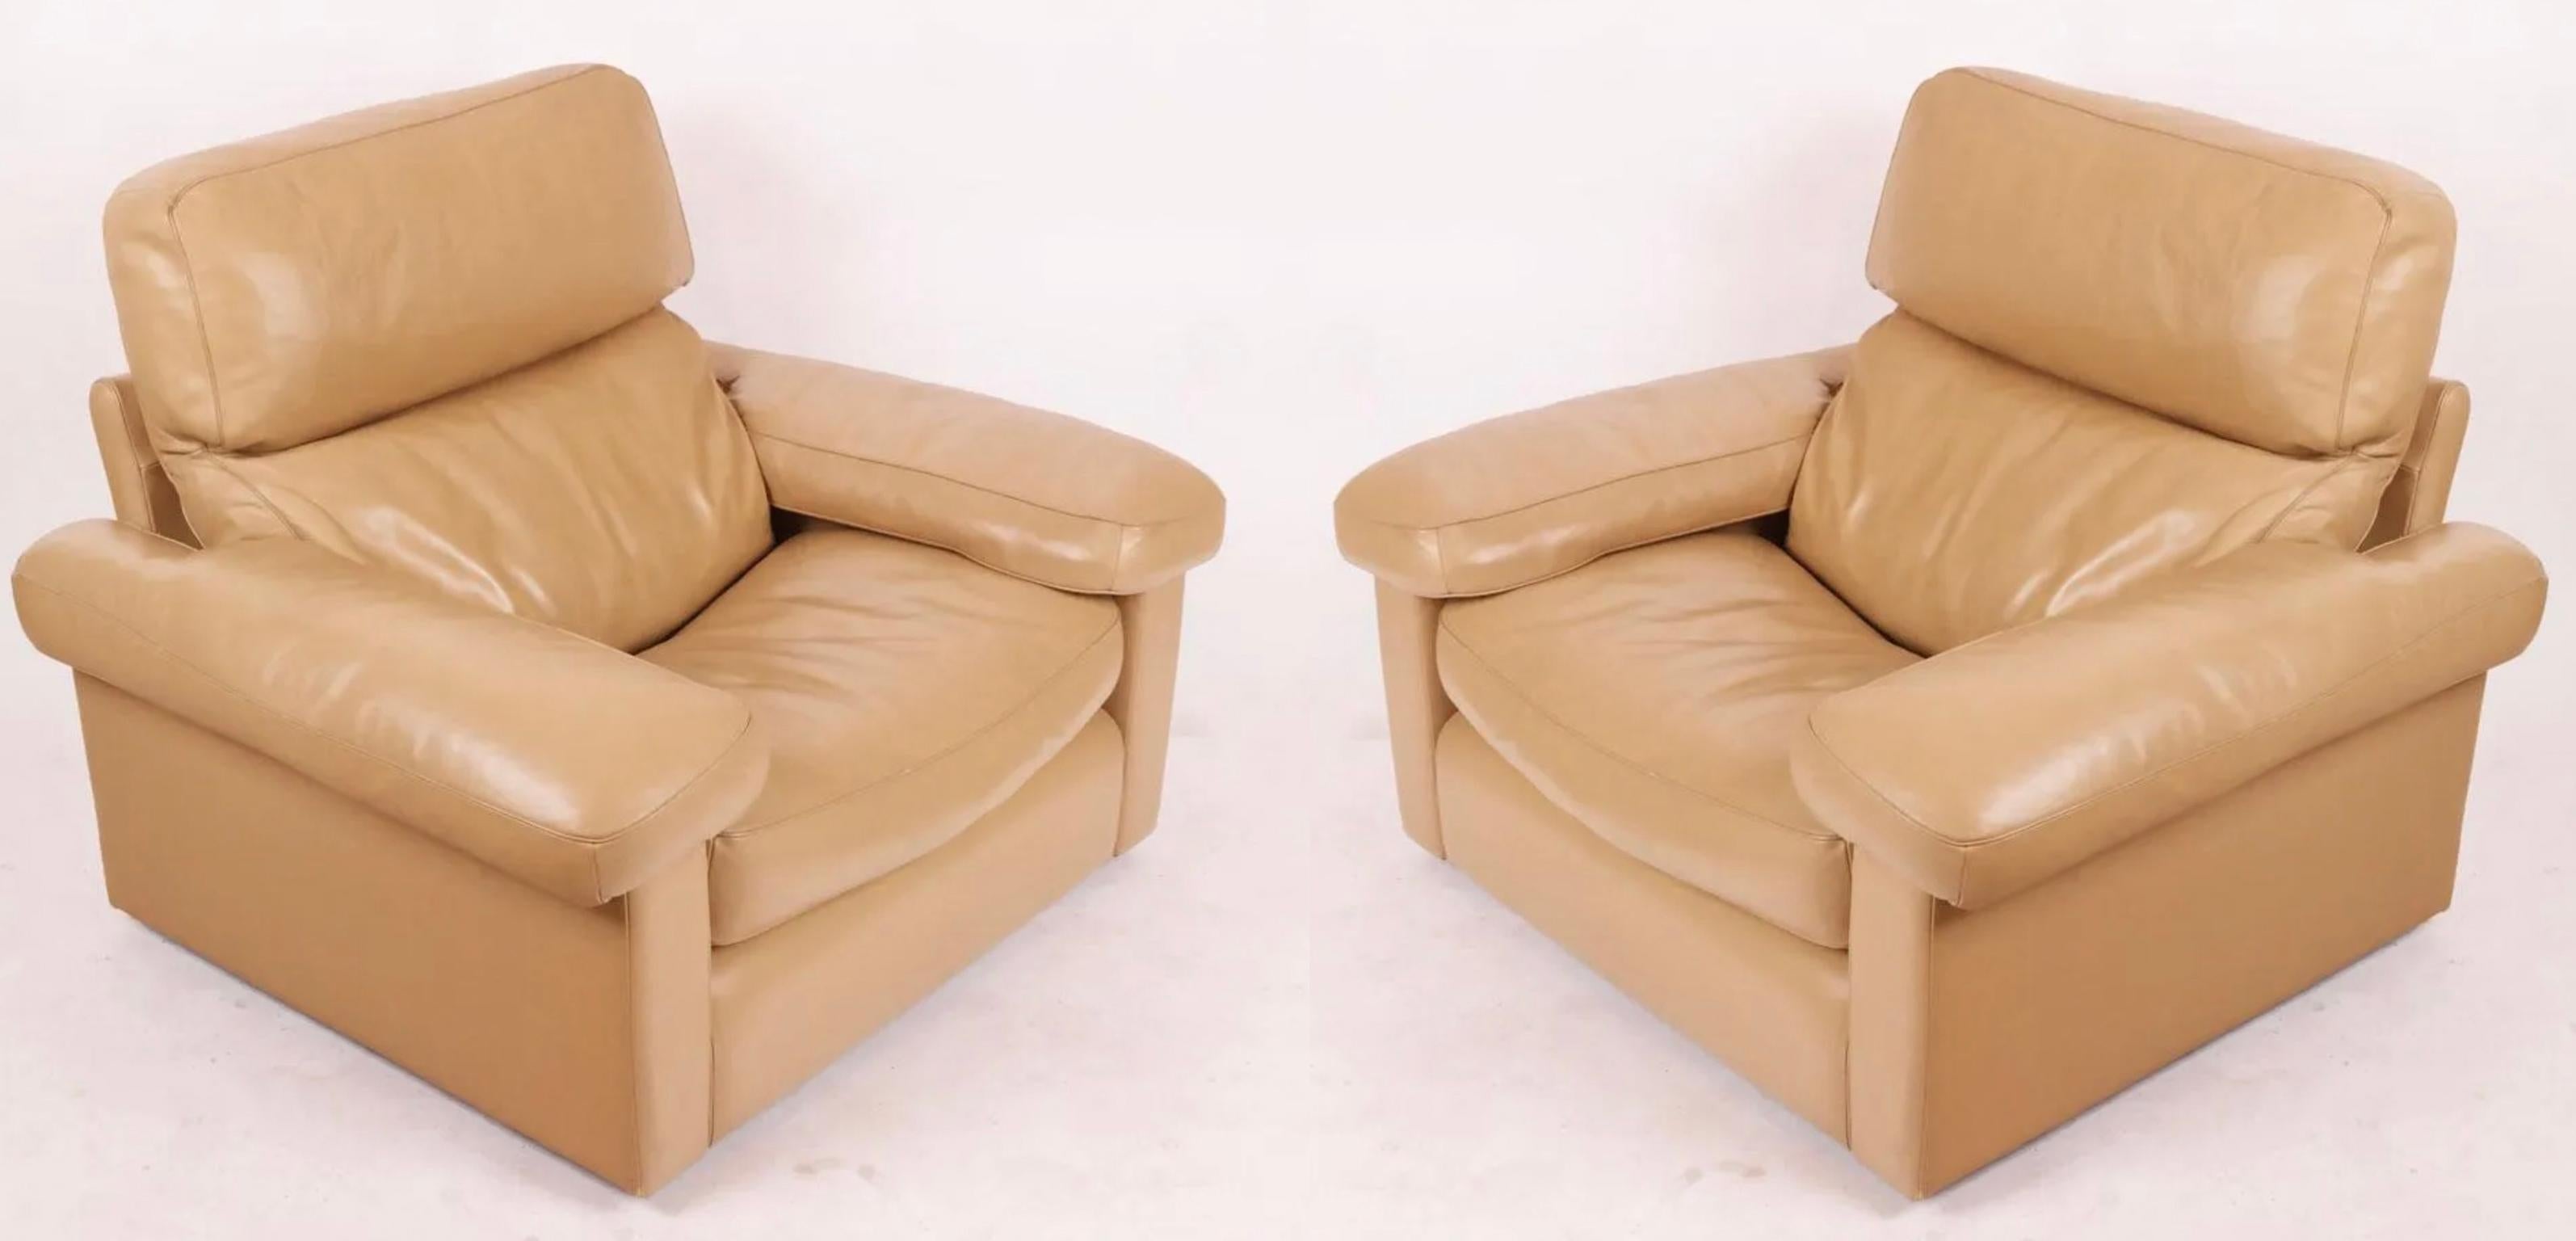 Pair of Vintage Mid-Century Modern Tan leather Lounge matching chairs by Tito Agnoli for Poltrona Frau Italy, circa 1970. Low Modern designed lounge chairs. Very soft Tan leather puffy cushions. Super comfortable chairs with great oversized design.